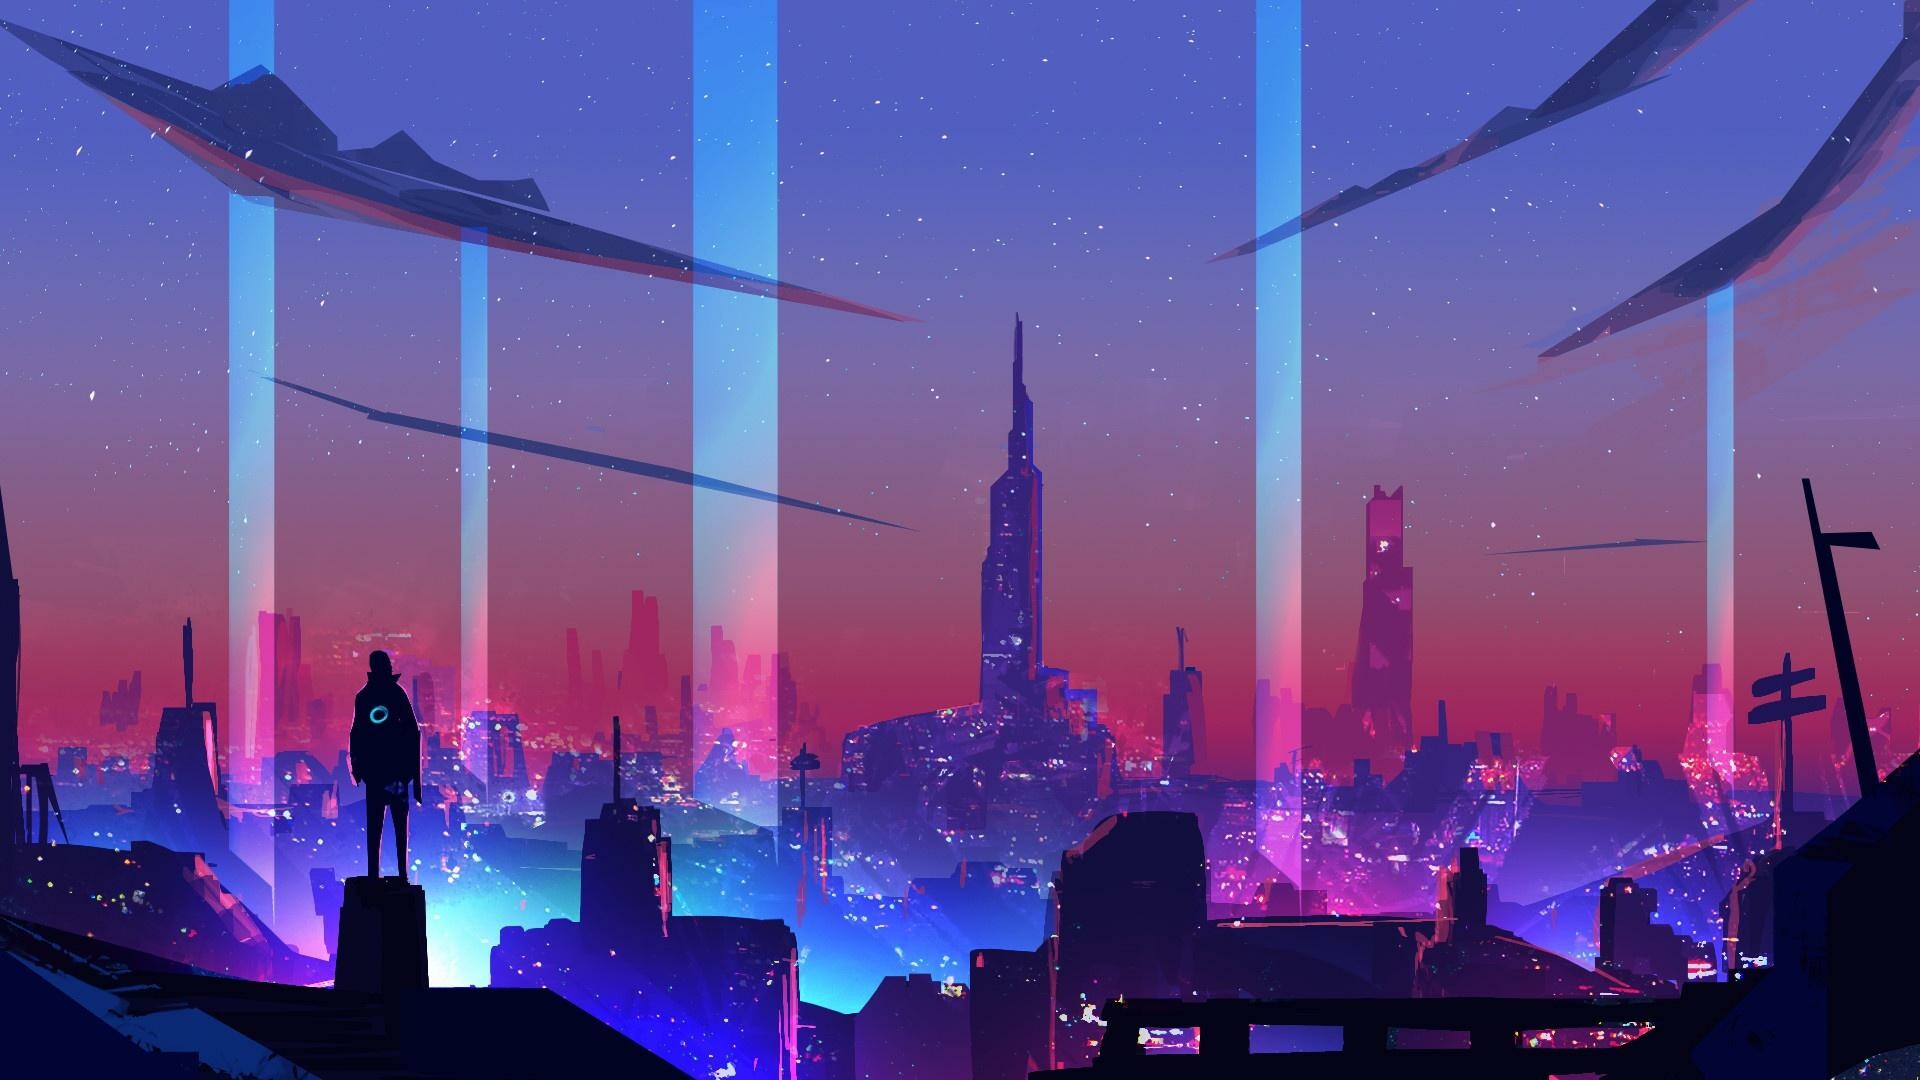 Neon: Used to create an intense and vibrant atmosphere. 1920x1080 Full HD Wallpaper.